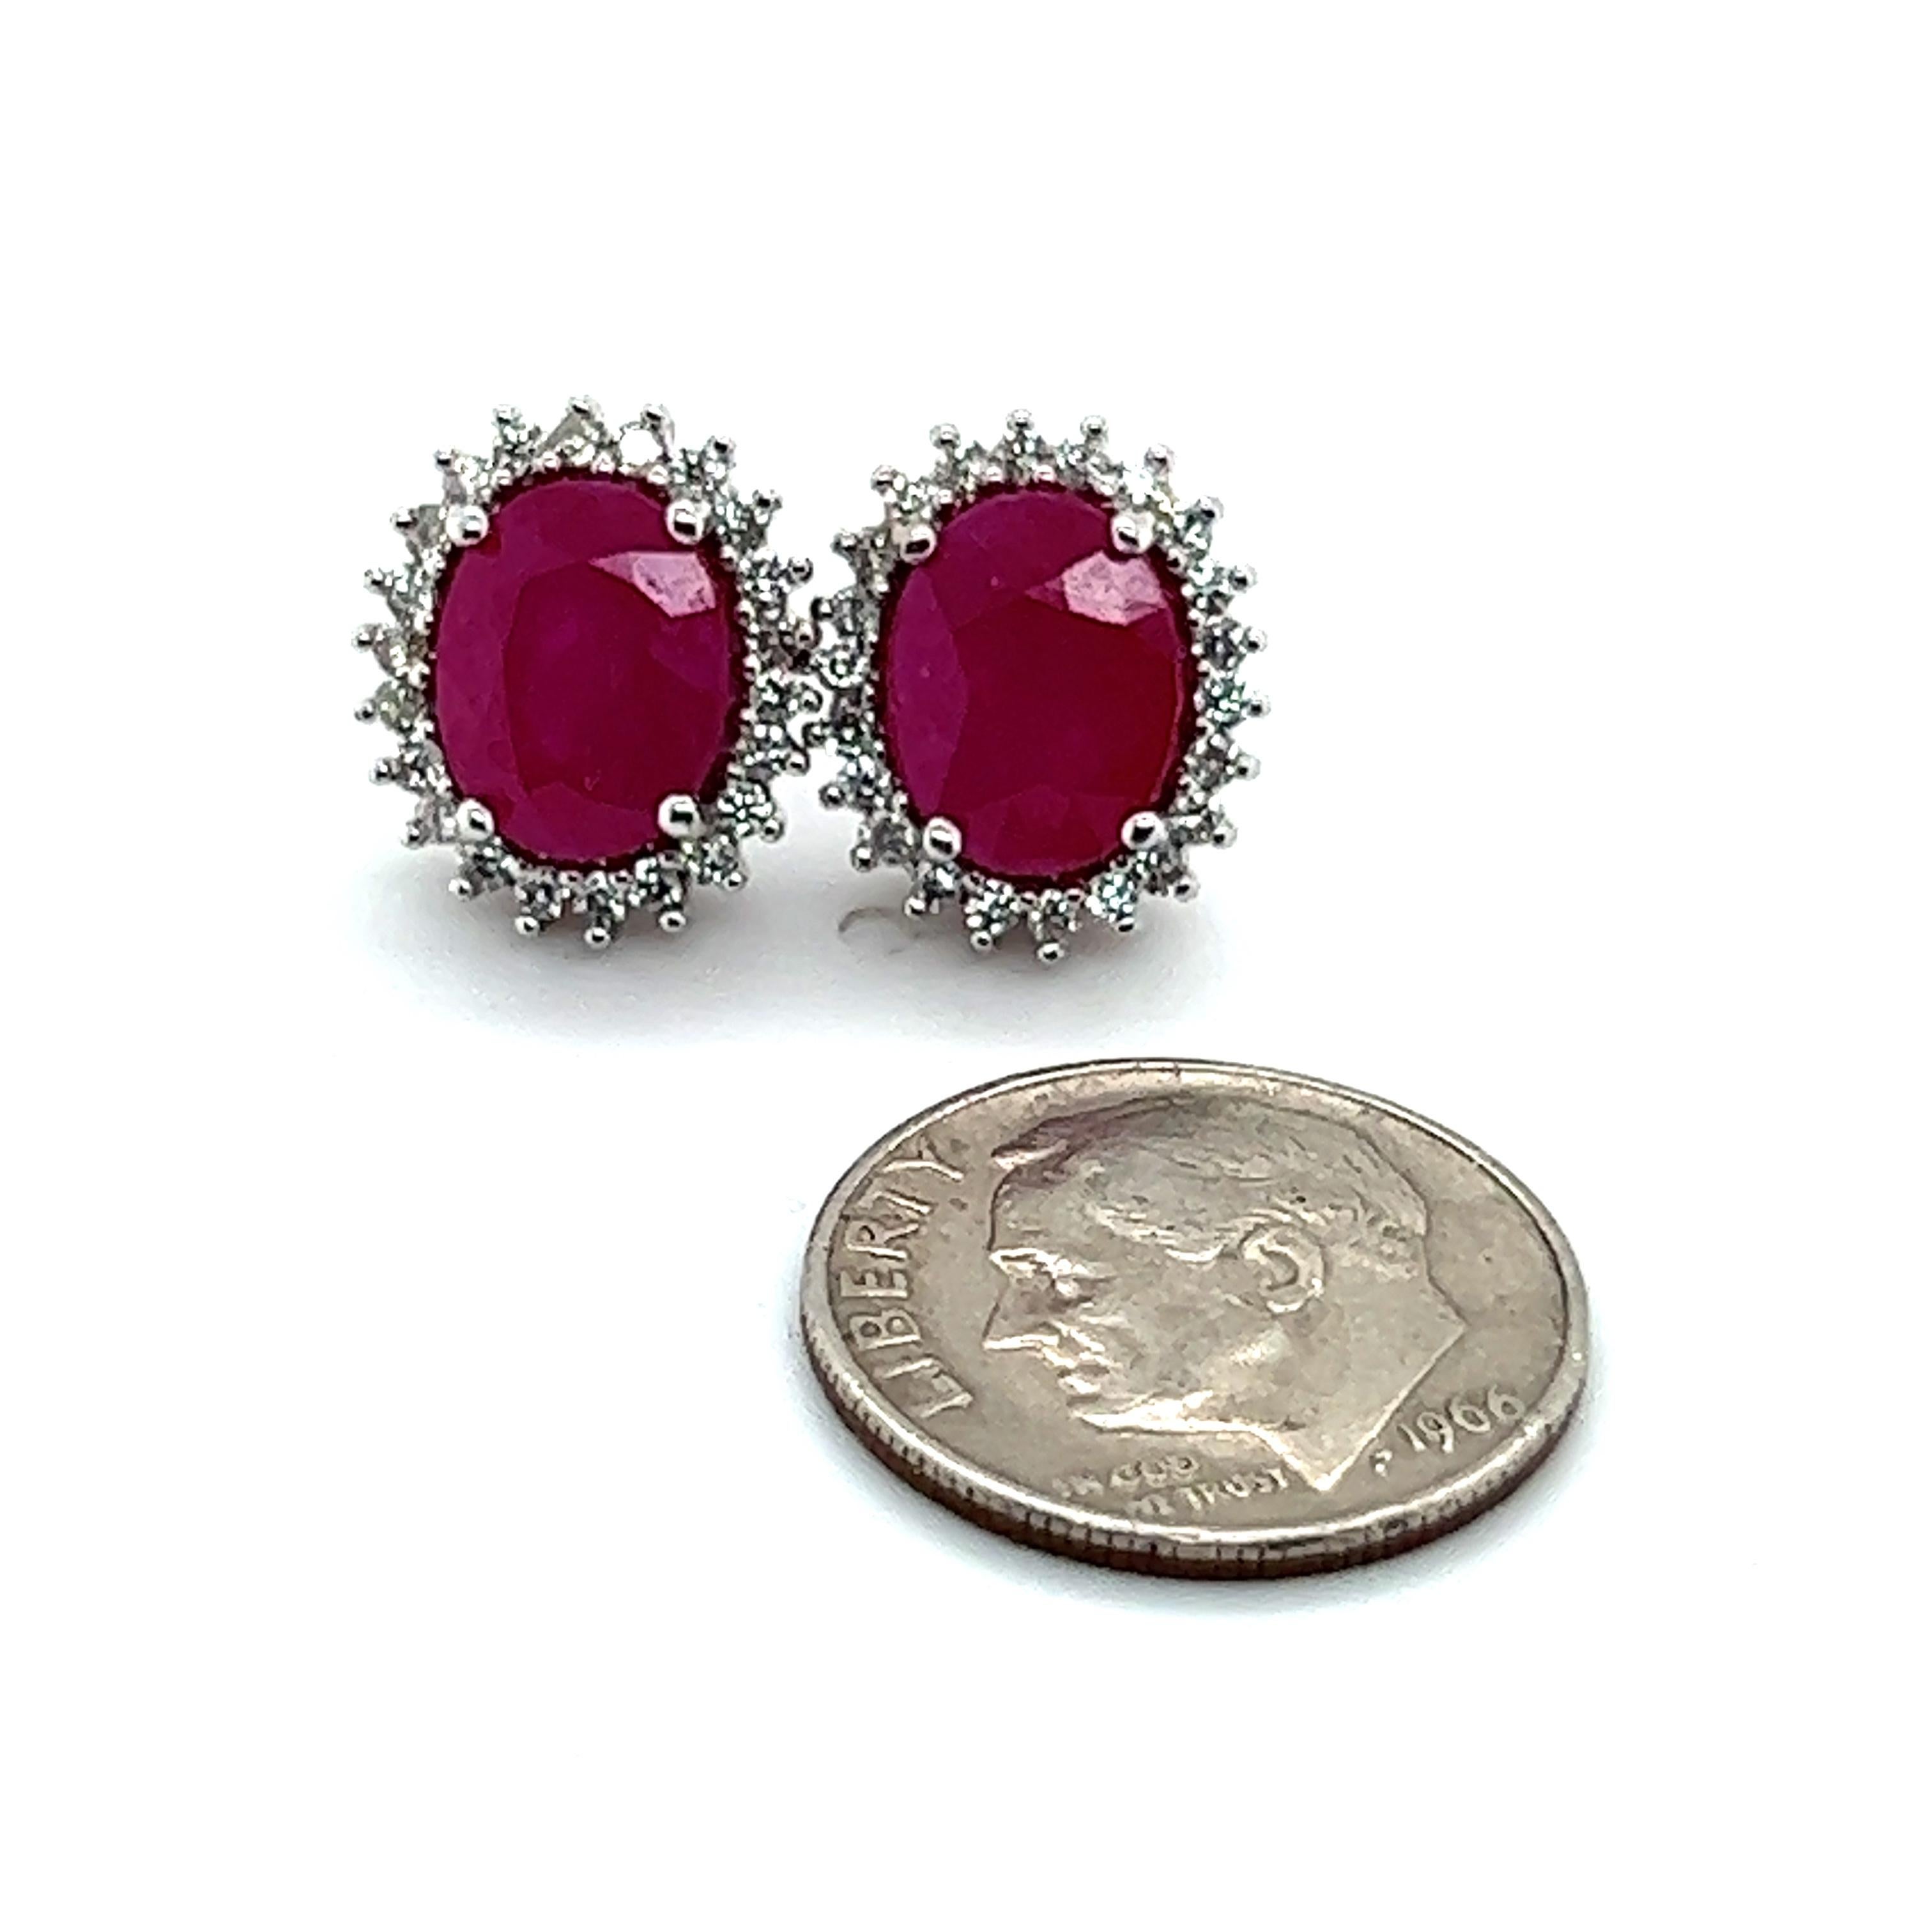 Natural Finely Faceted Quality Ruby Diamond Stud Earrings 14k W Gold 5.74 TCW Certified $5,175 211889

This is a Unique Custom Made Glamorous Piece of Jewelry!

Nothing says, “I Love you” more than Diamonds and Pearls!

These Ruby earrings have been